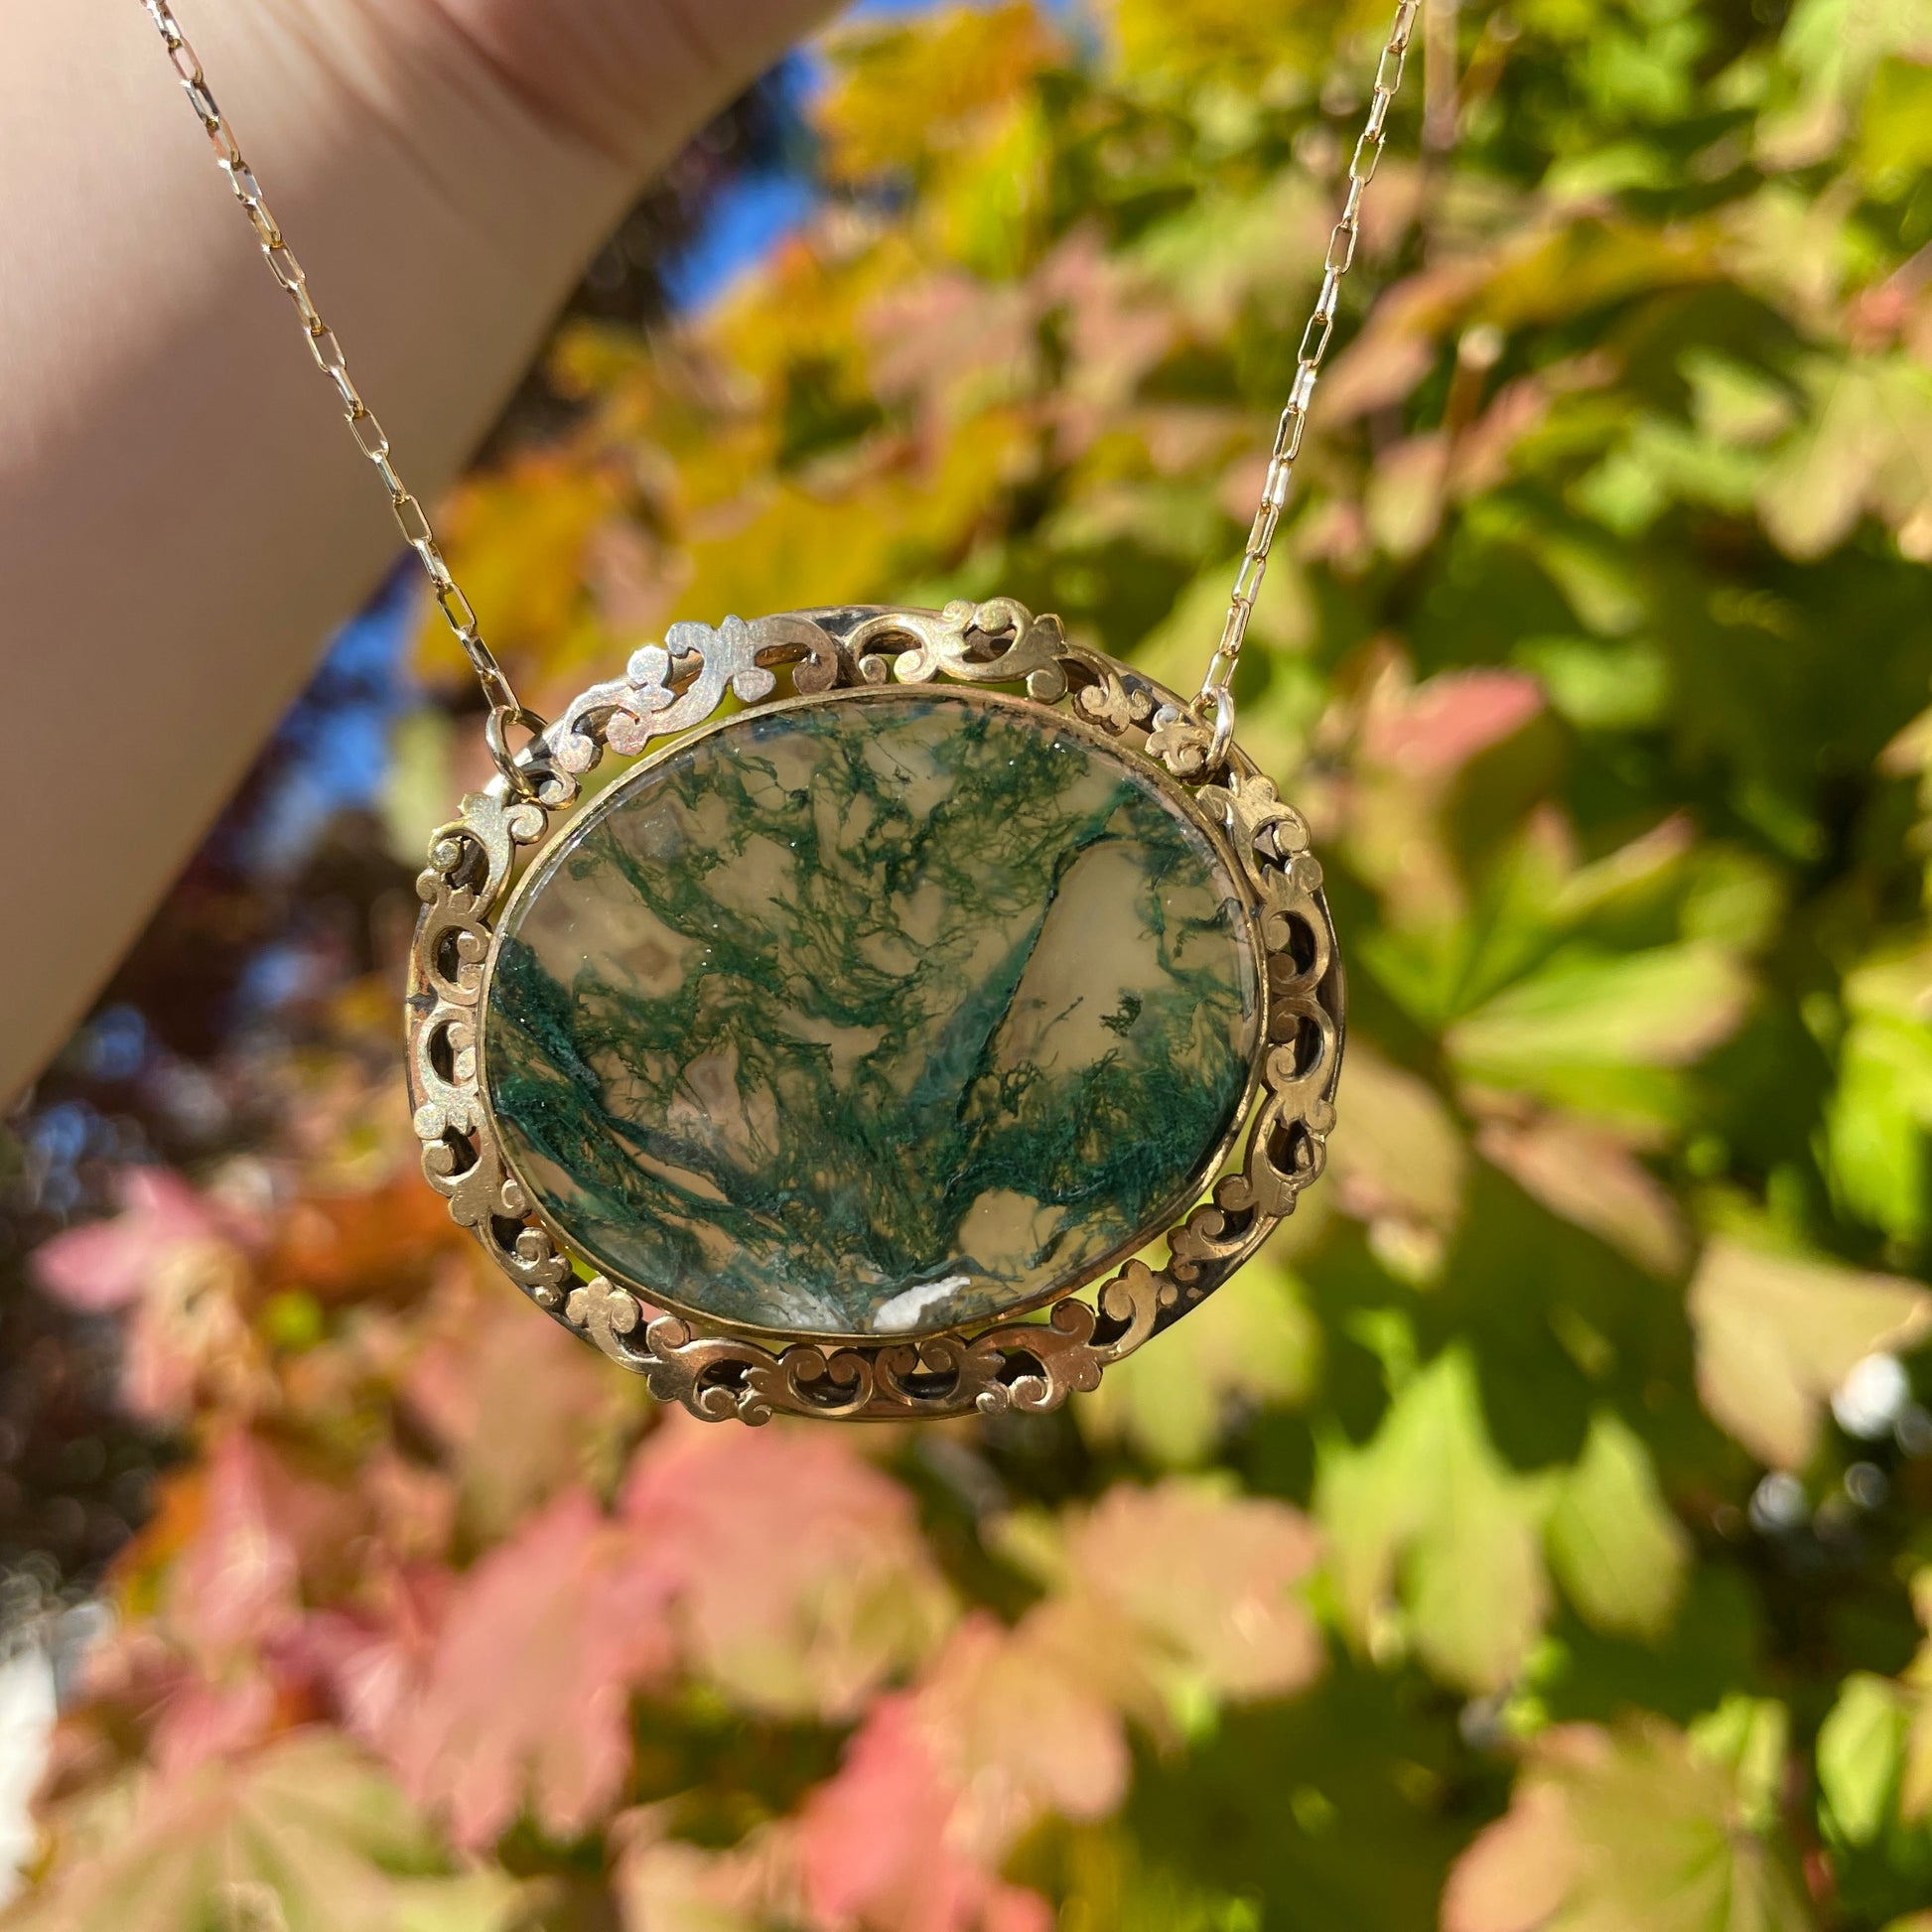 Antique Victorian Crystal Quartz Moss Green Agate Necklace held in the outdoor sunlight